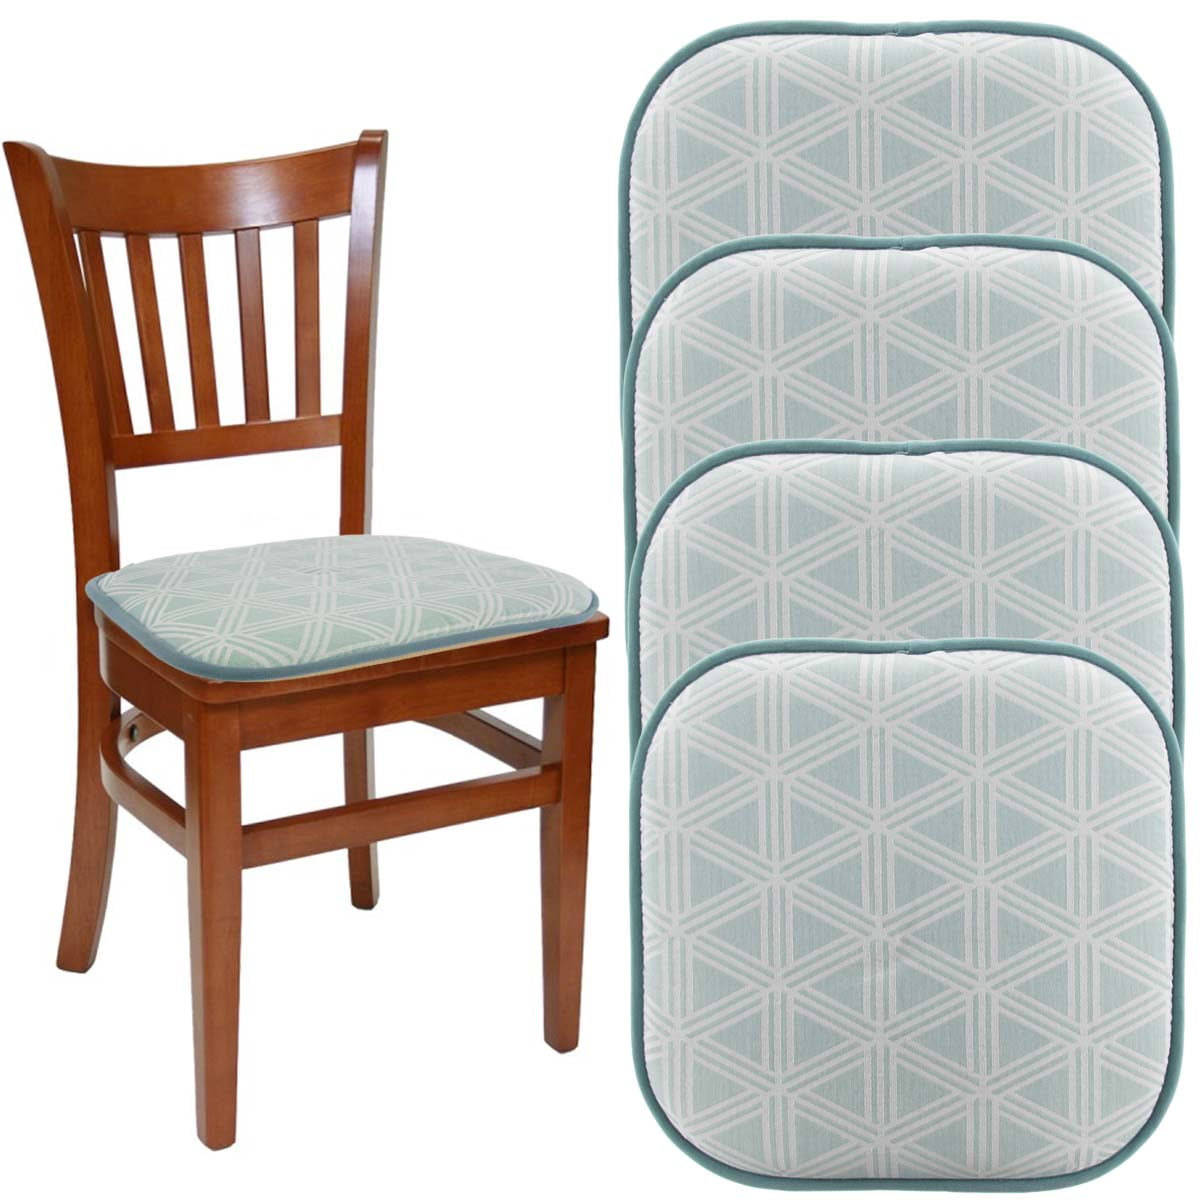 kitchen chair cushions with ties 15 l x 17 w